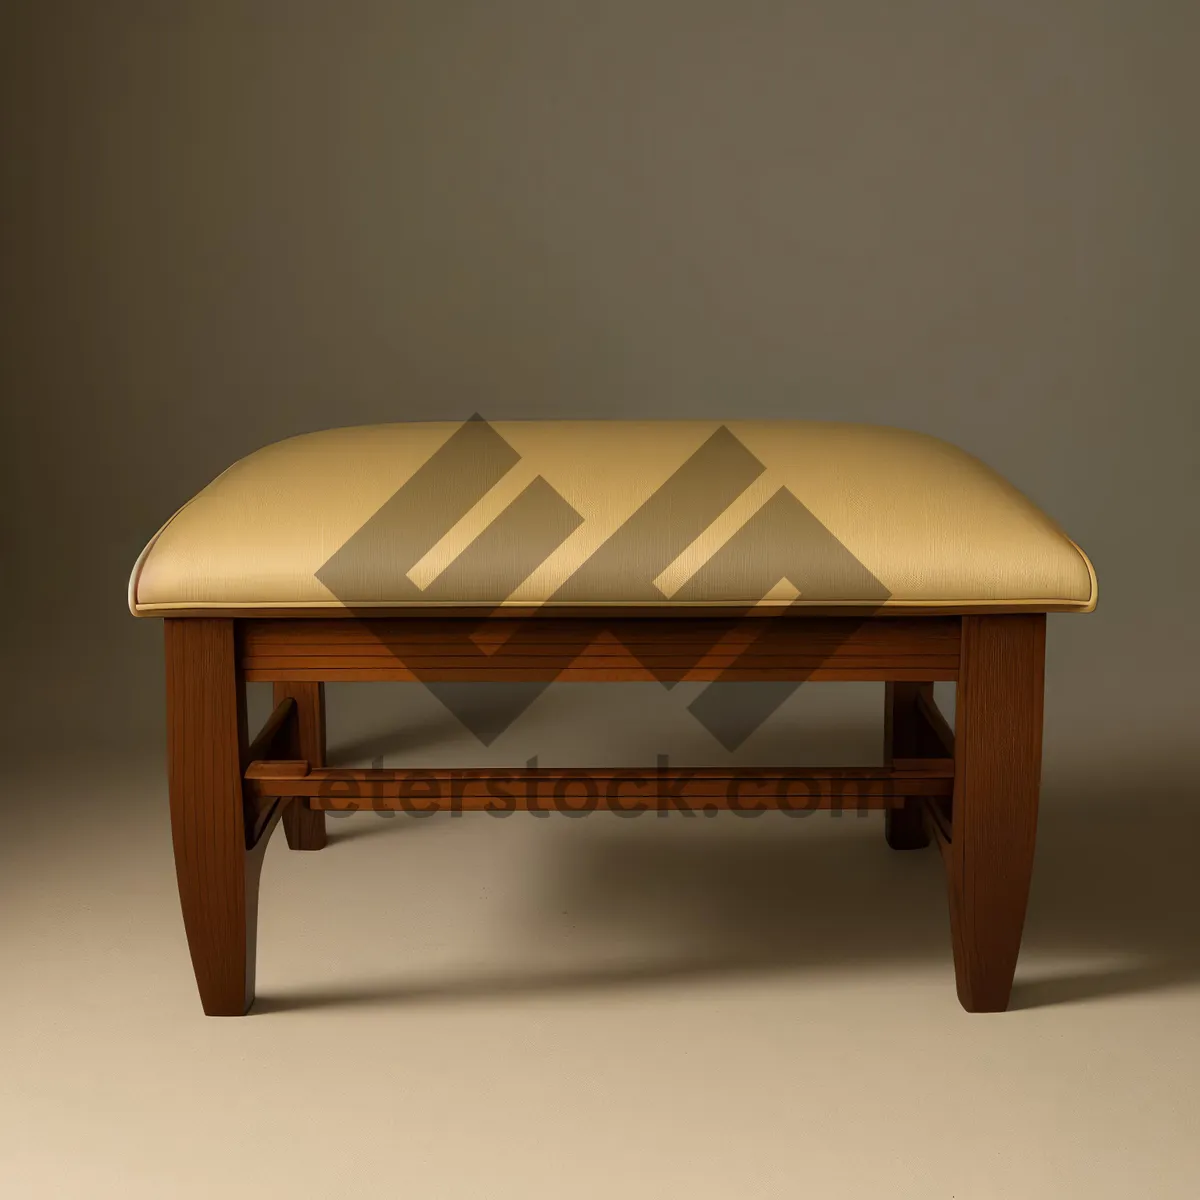 Picture of Modern Wooden Footstool: Stylish Rest for Your Home